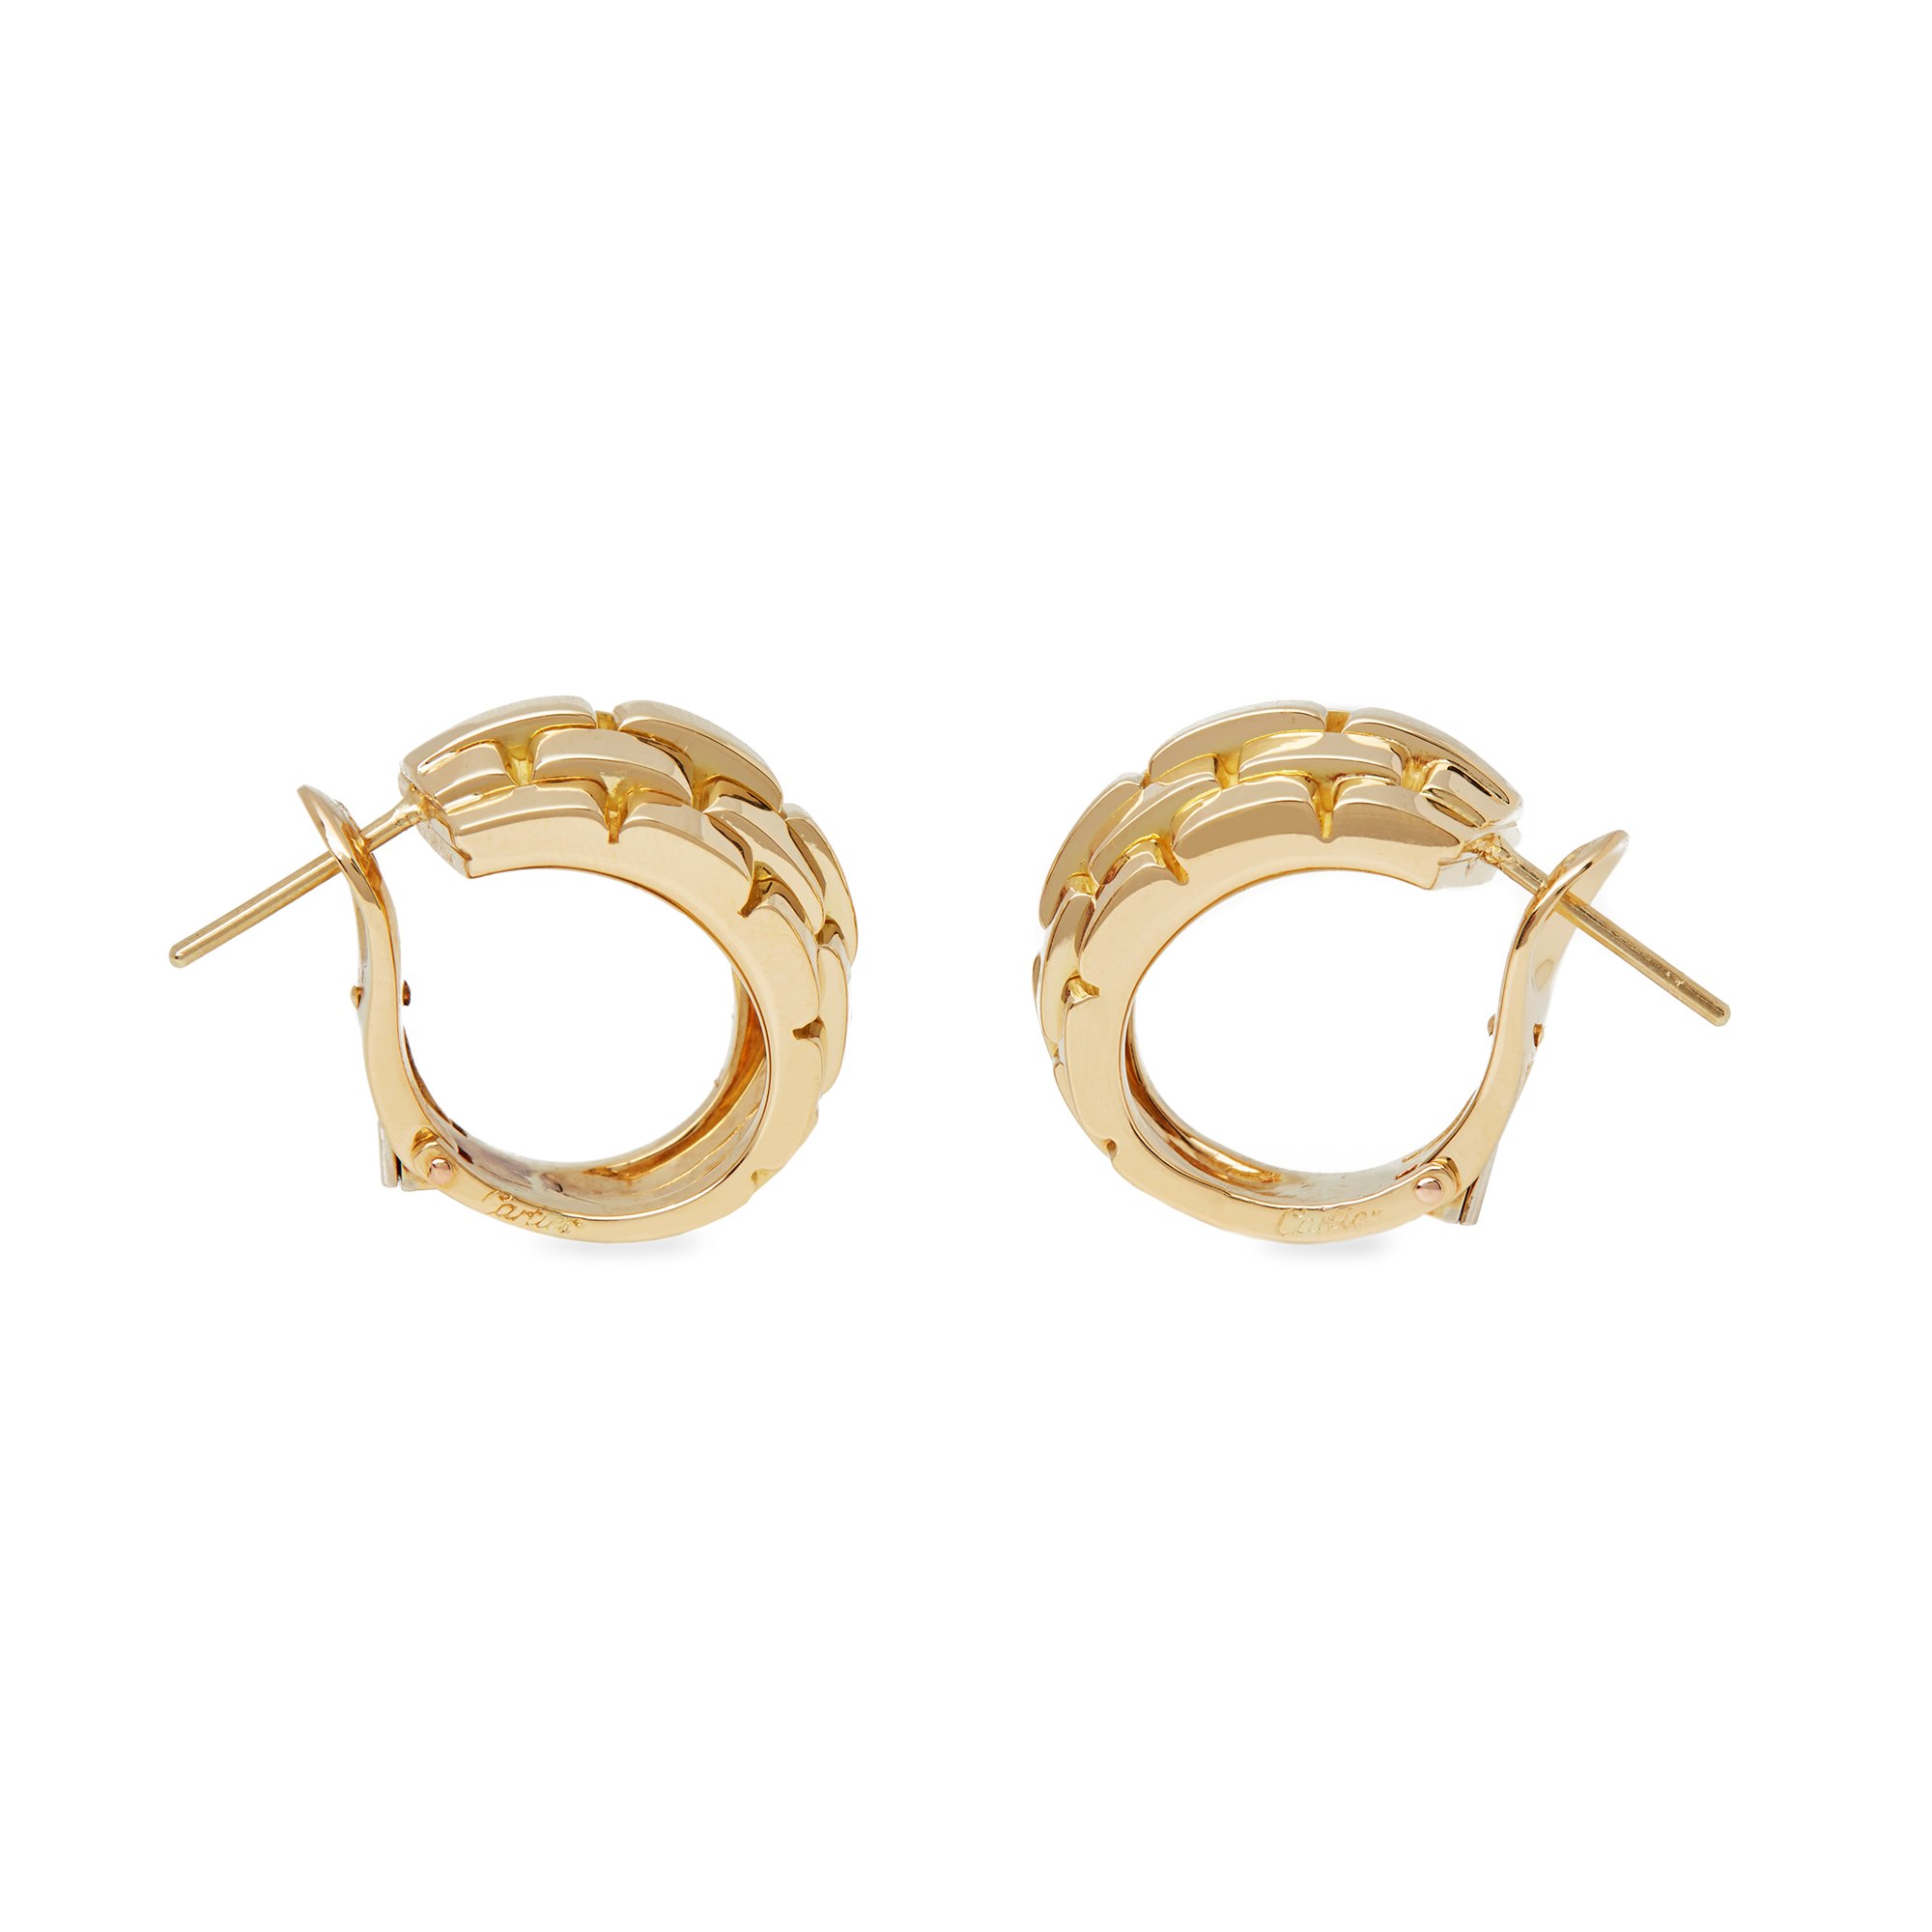 Cartier 18k Yellow Gold Maillon Panthère Earrings